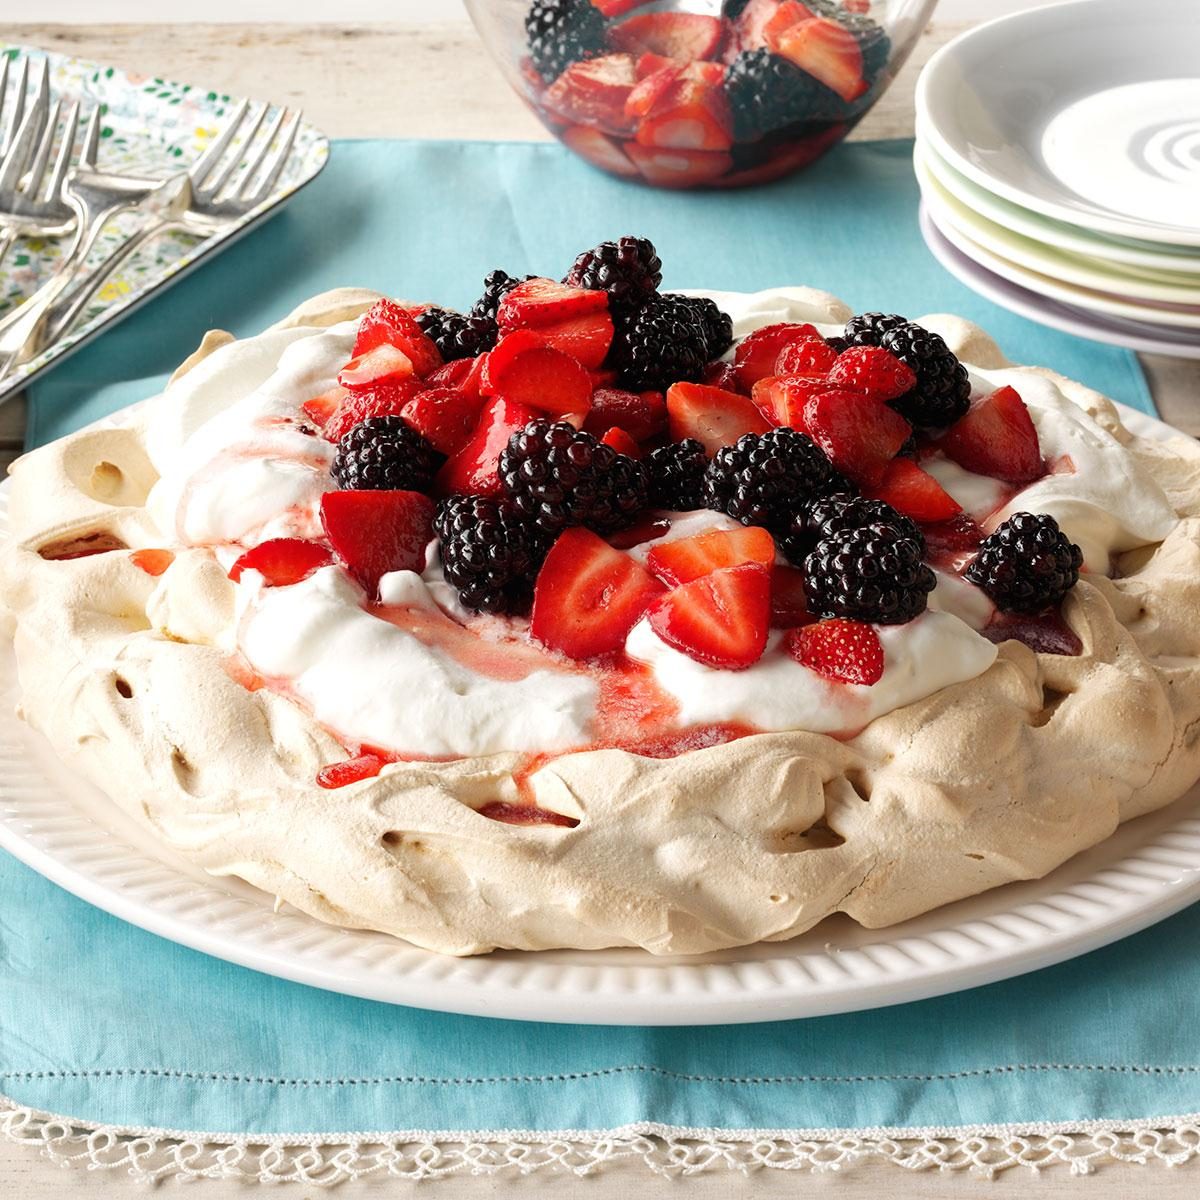 Inspired by Jane's Red, White and Blue Pavlova